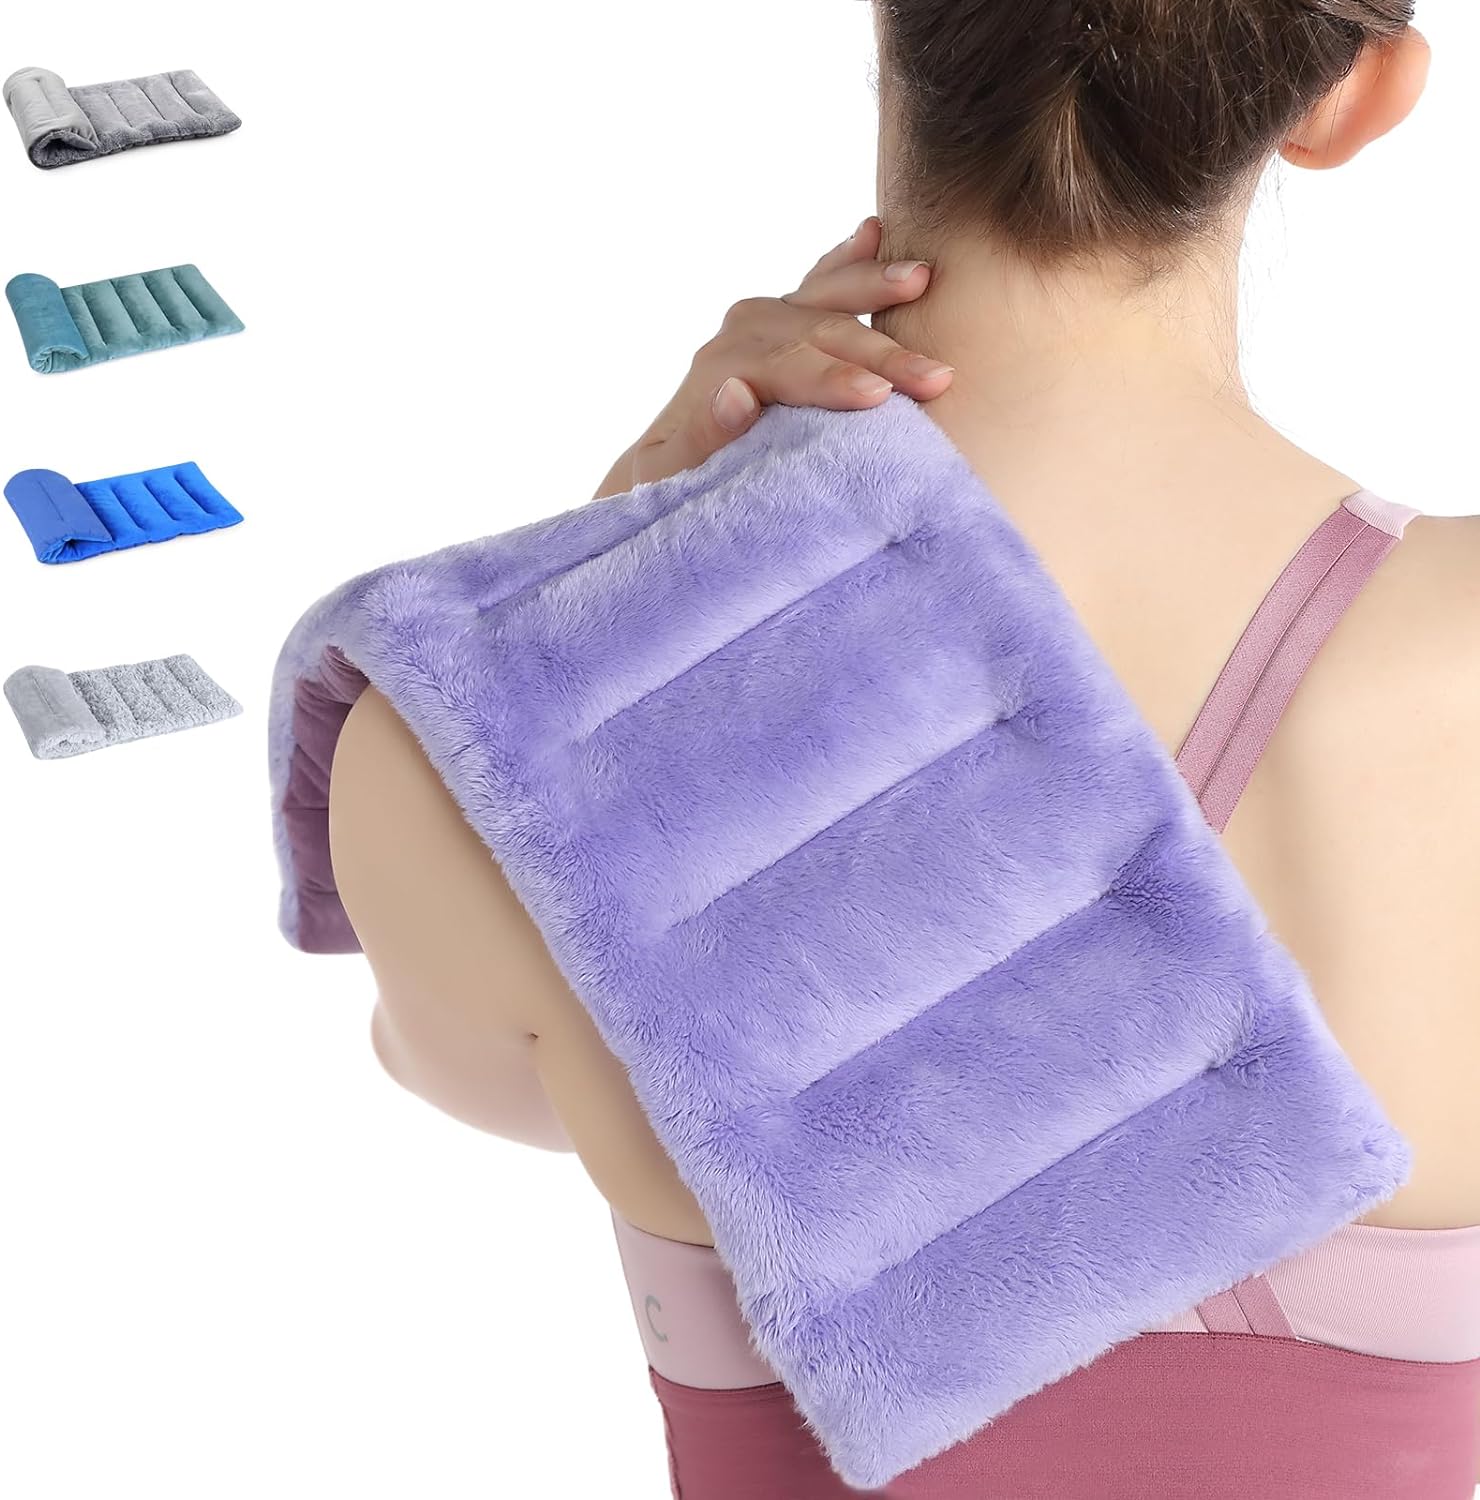 Review of SuzziPad Microwave Heating Pad for Pain Relief, Purple